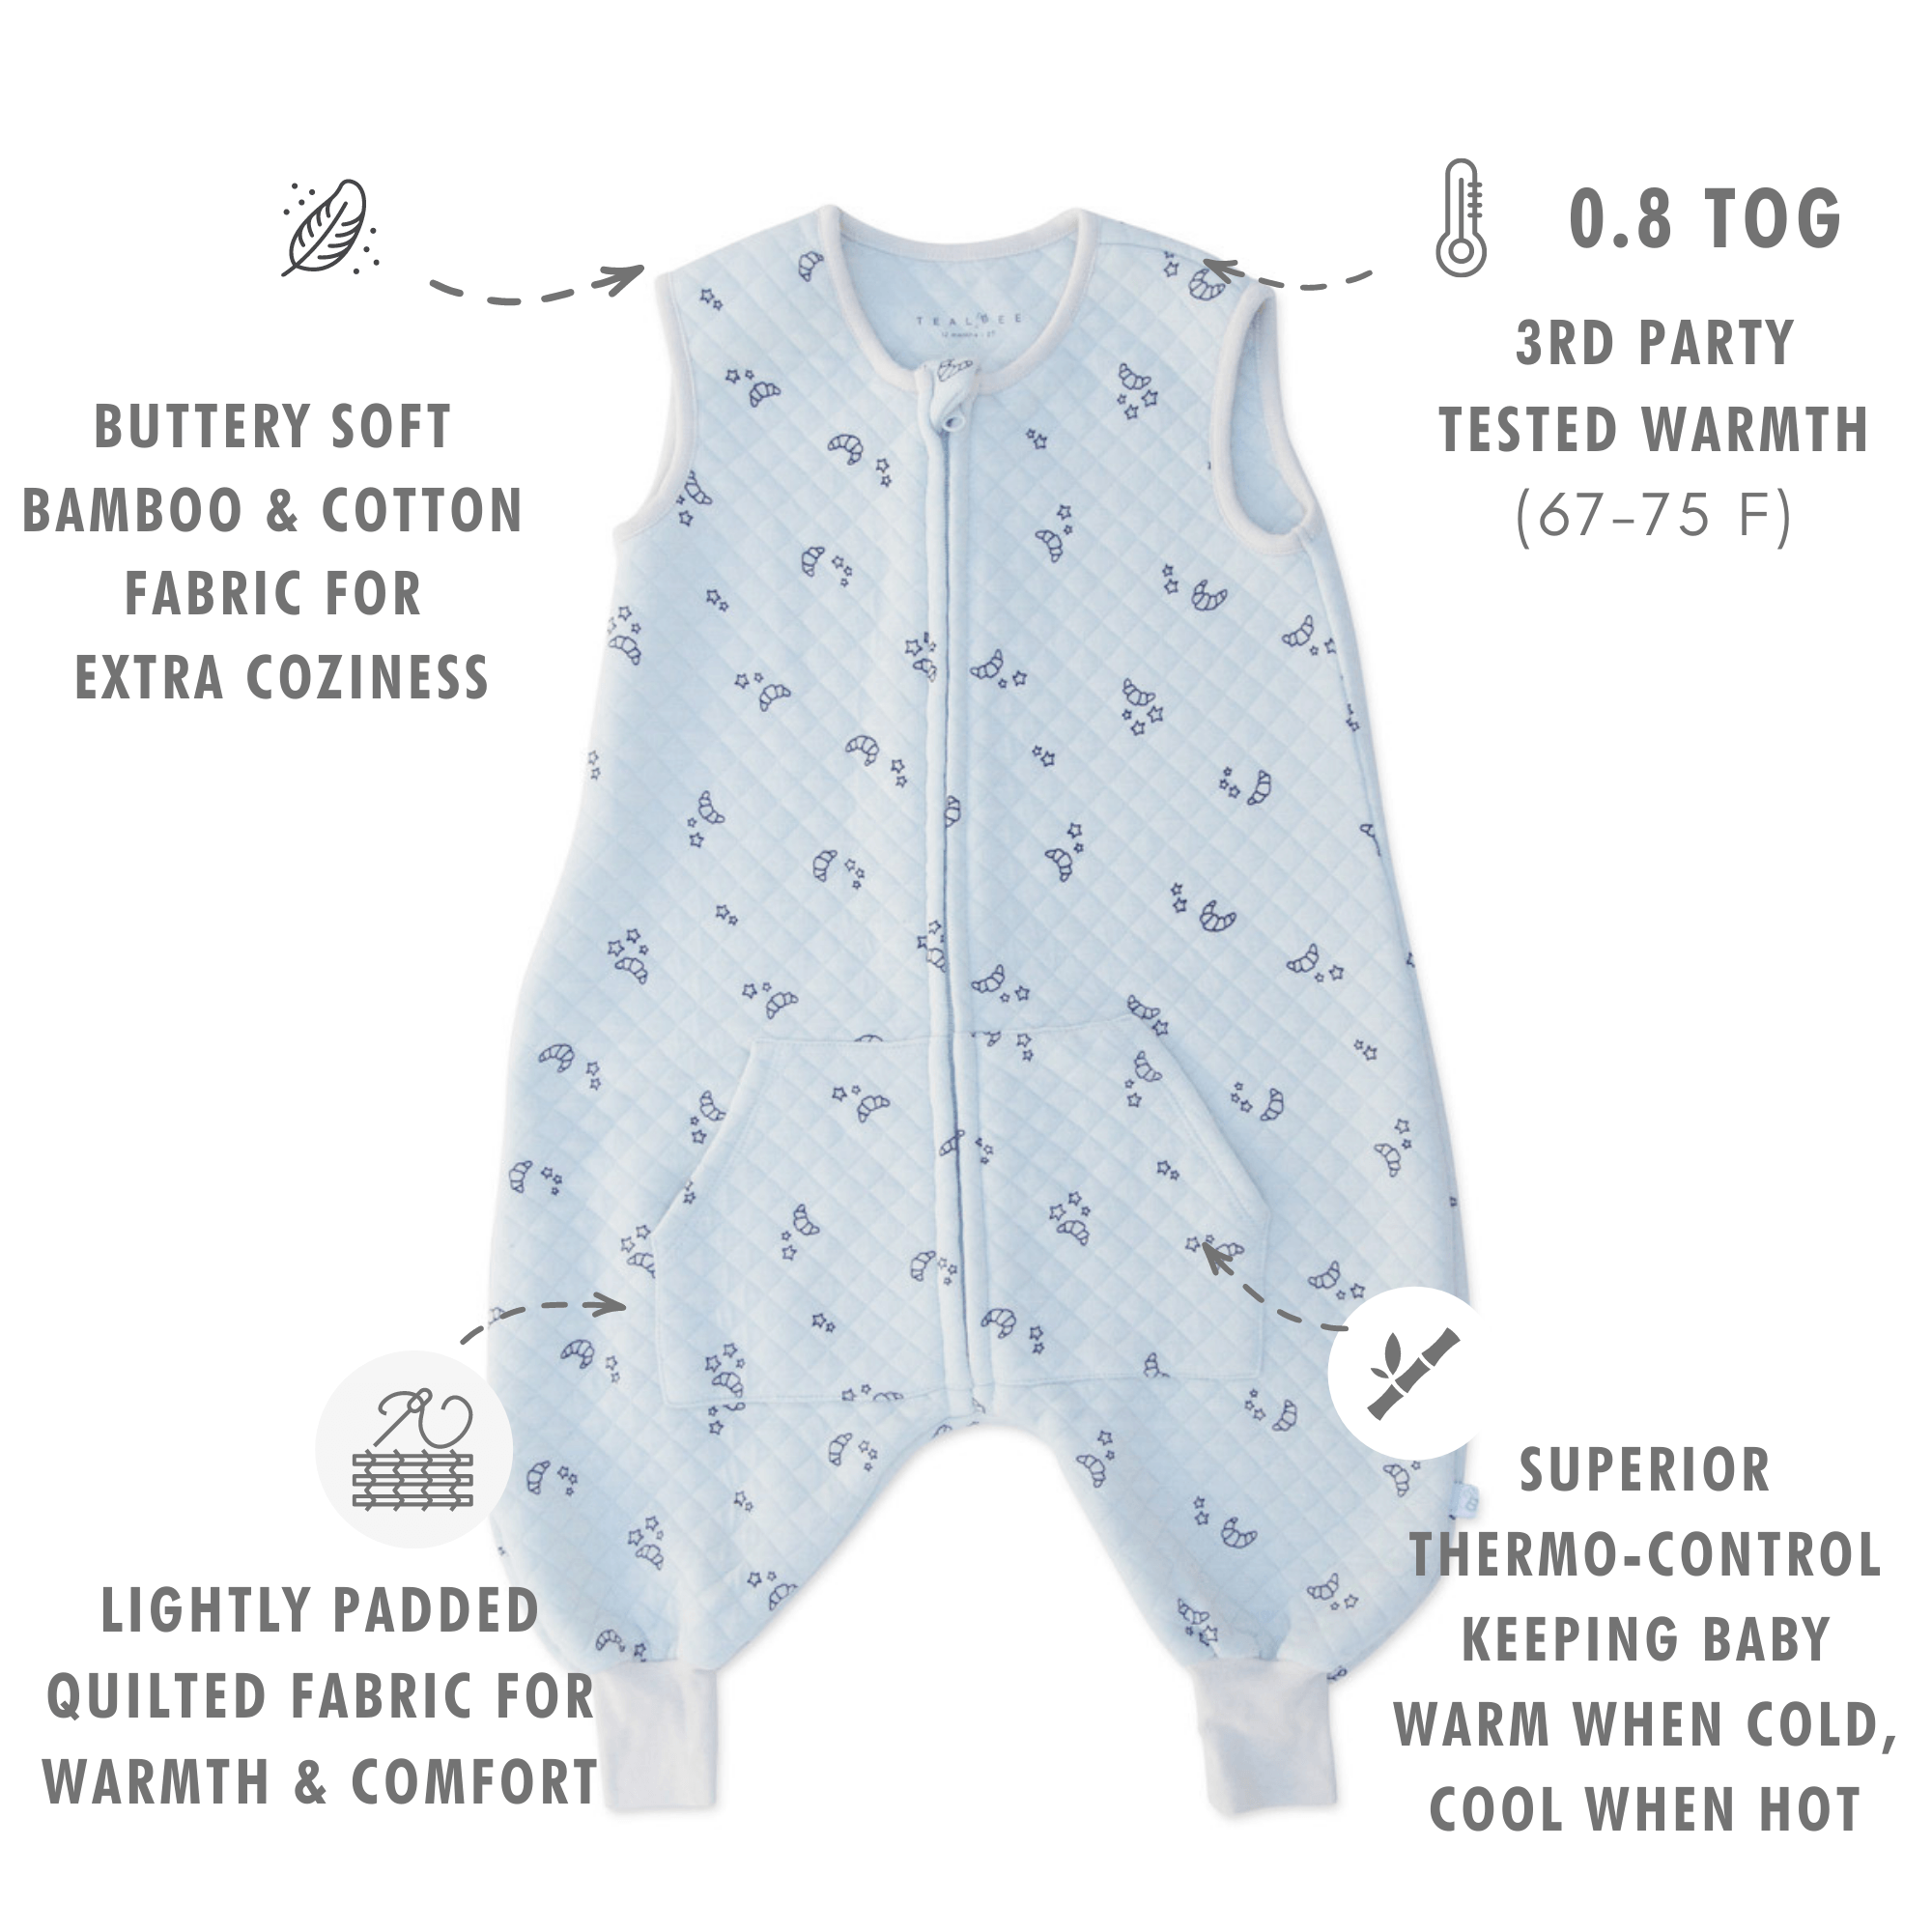 Tealbee Croissant Dreamsuit Toddler Sleep Sack - buttery soft bamboo and cotton fabric for extra coziness, 0.8 TOG 3rd party tested warmth (67 to 75 Fahrenheit), lightly padded quilted fabric for warmth and comfort, superior thermo-control keeping baby warm when cold and cool when hot